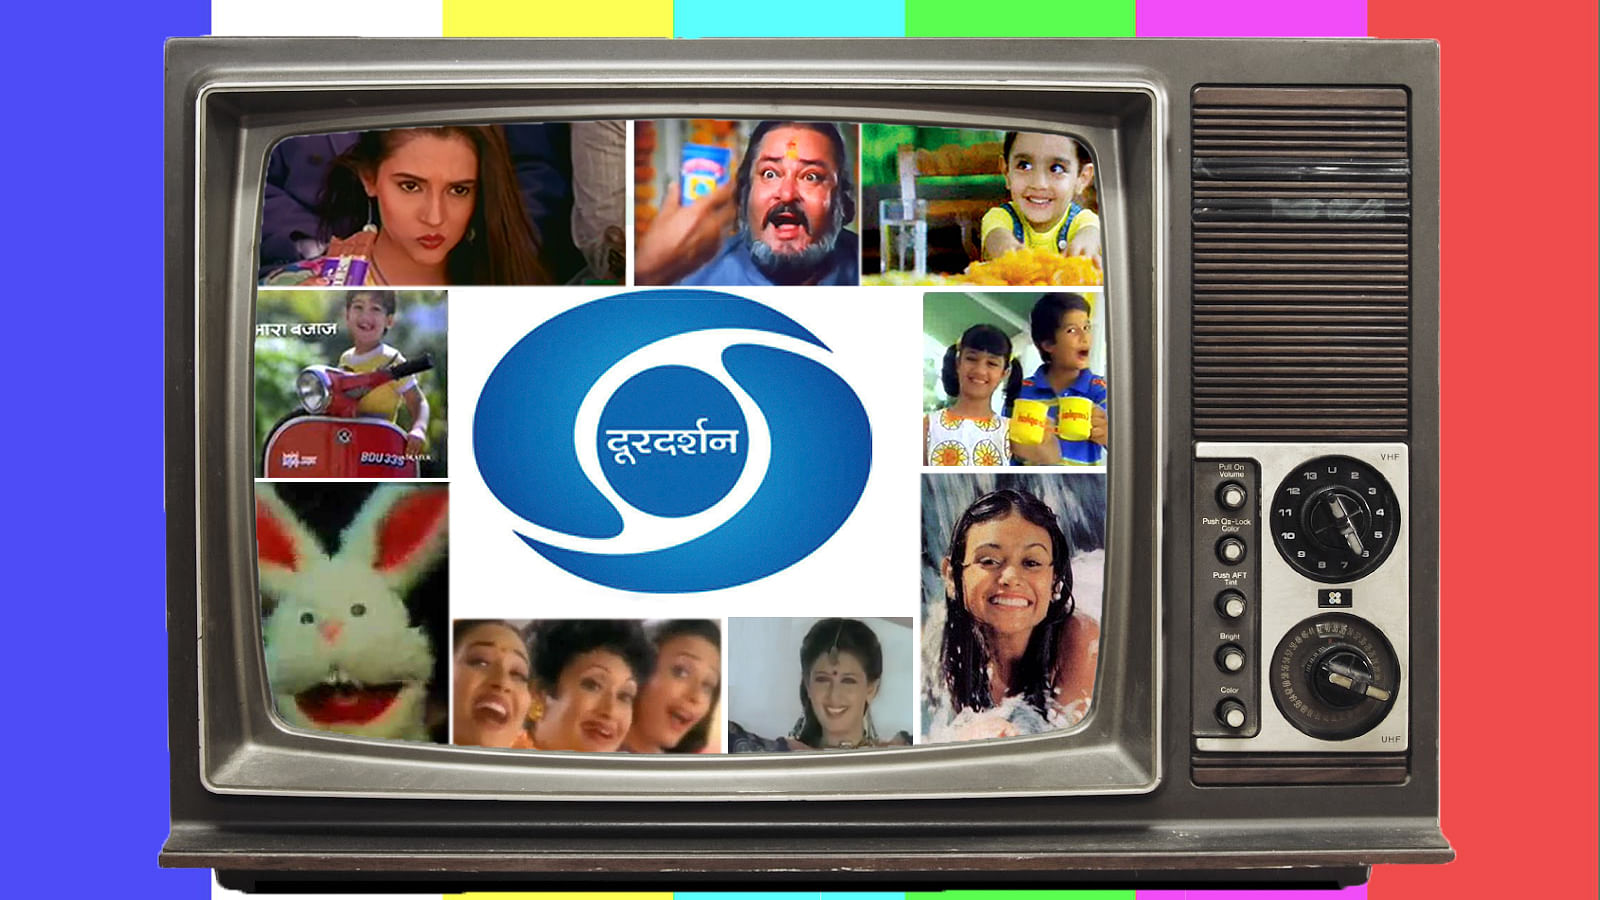 Our favourite 90s ads in 2 minutes. (Photo: The Quint)